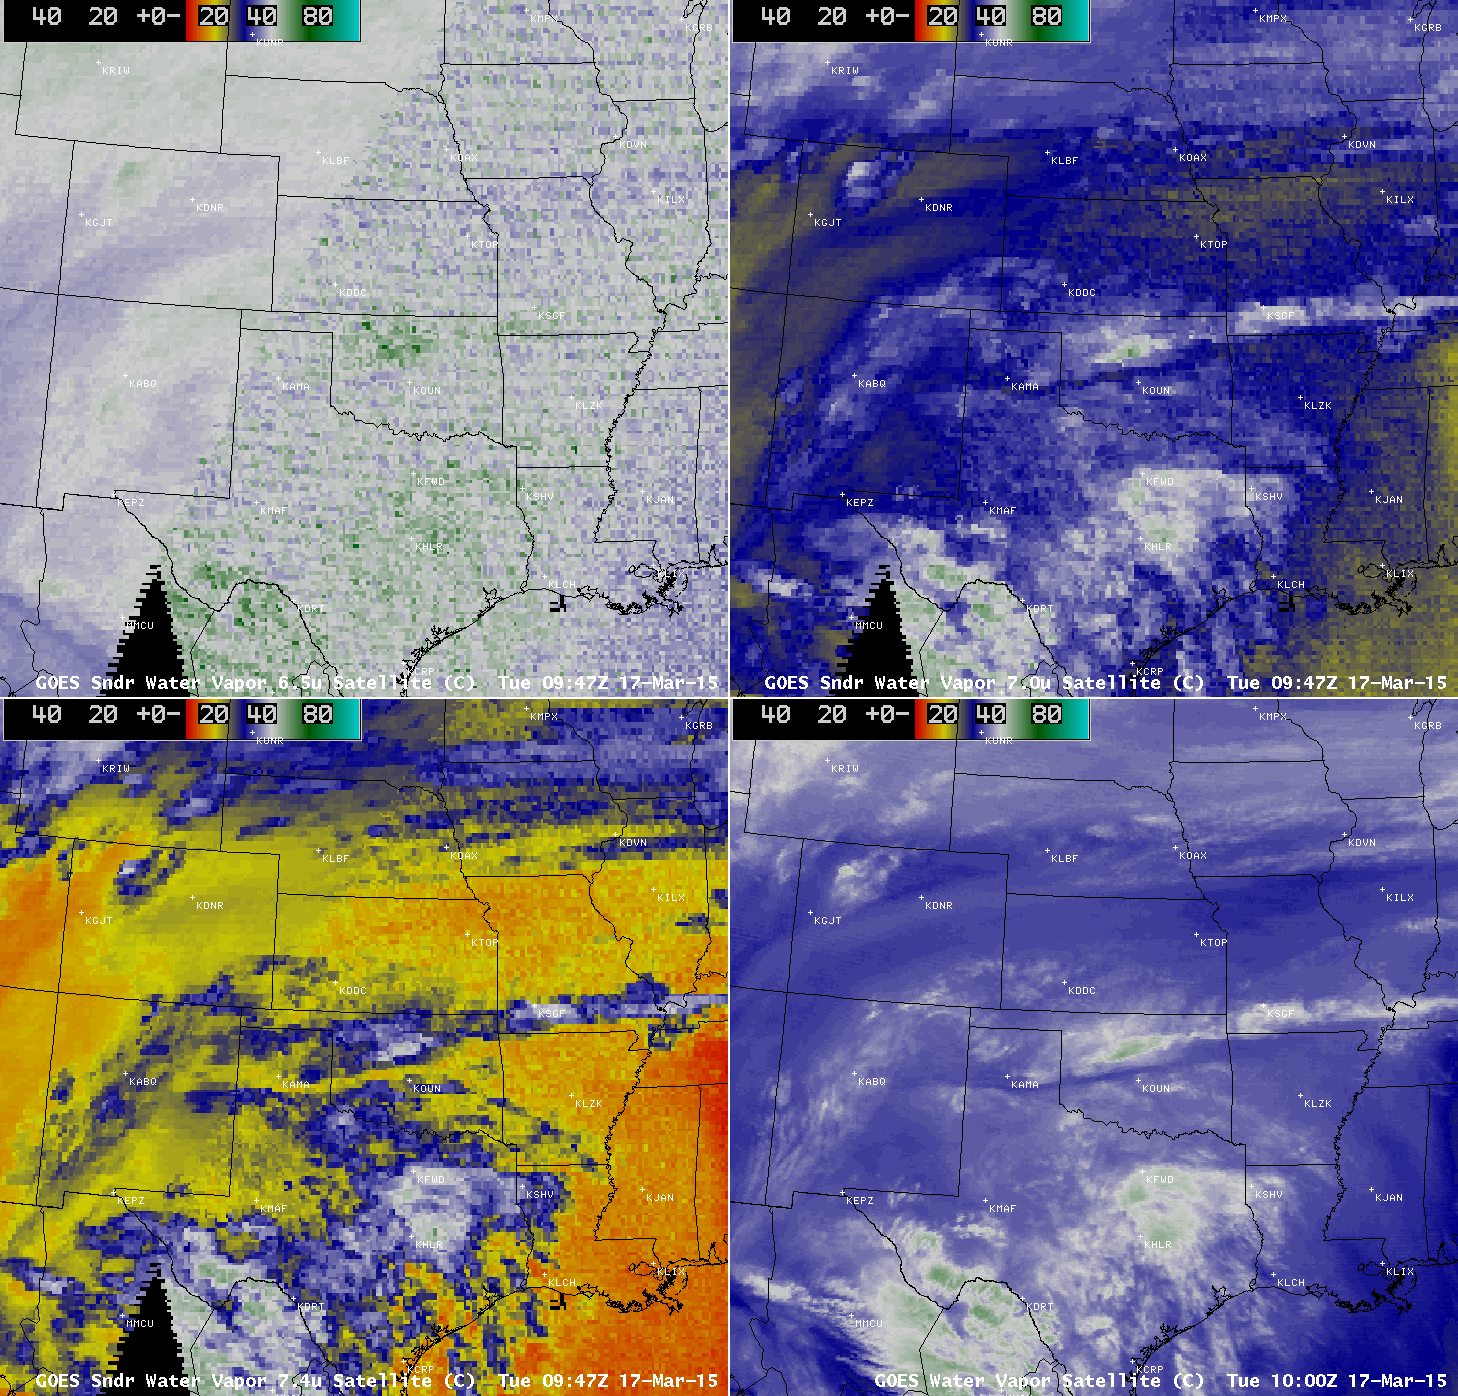 GOES-13 Sounder 6.5 µm (upper left), 7.0 µm (upper right), 7.4 µm (lower left), and Imager 6.5 µm (lower right) - click to play animation